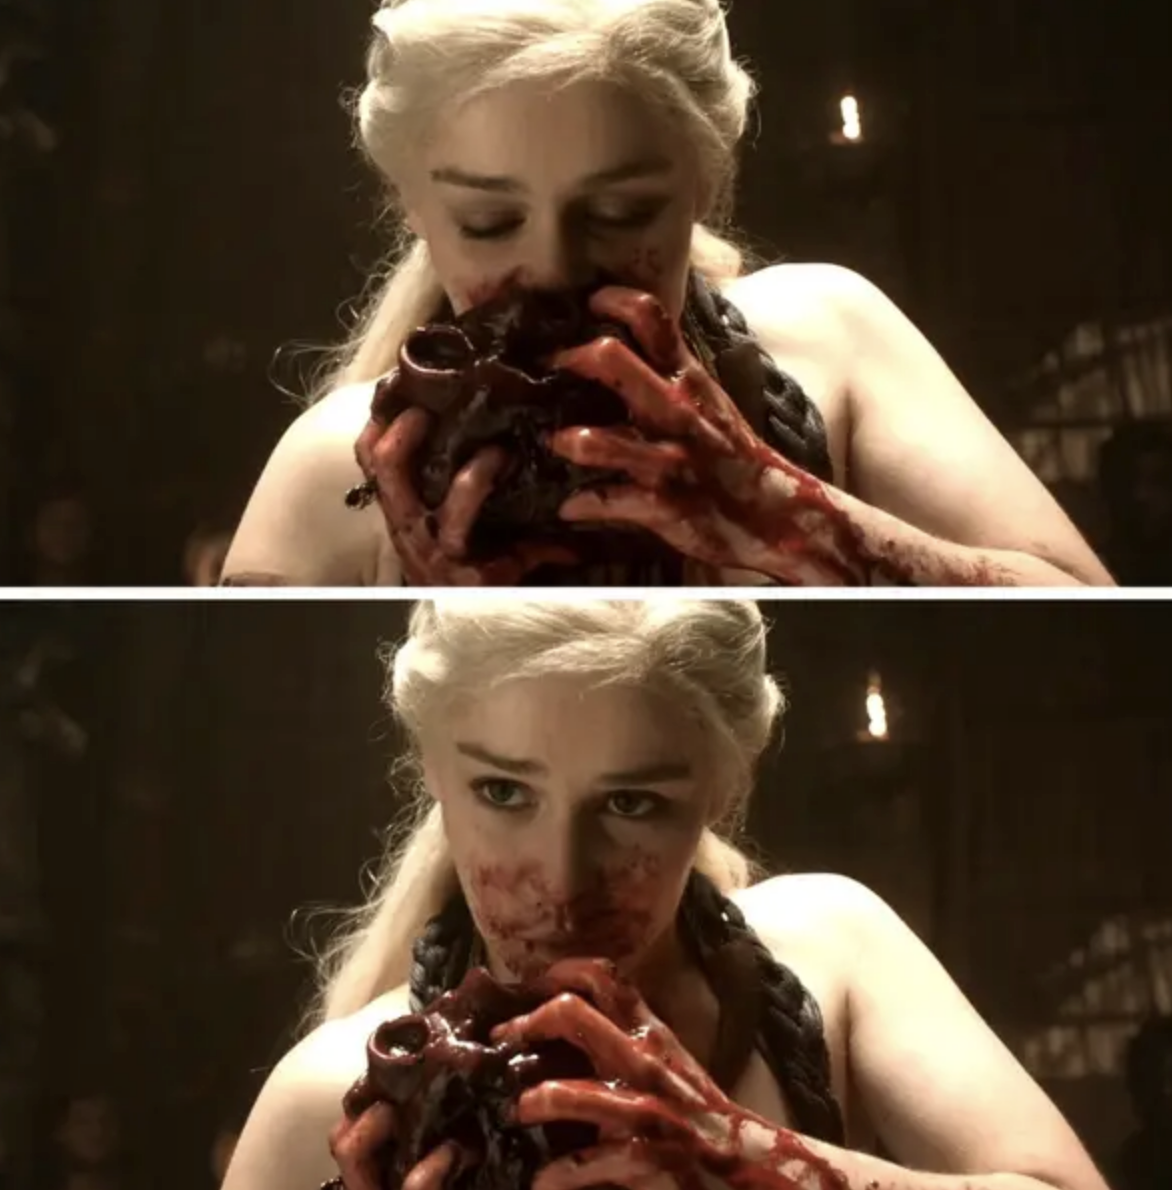 Daenerys from Game of Thrones holds a heart with her hands and takes a bite, with blood on her face and hands